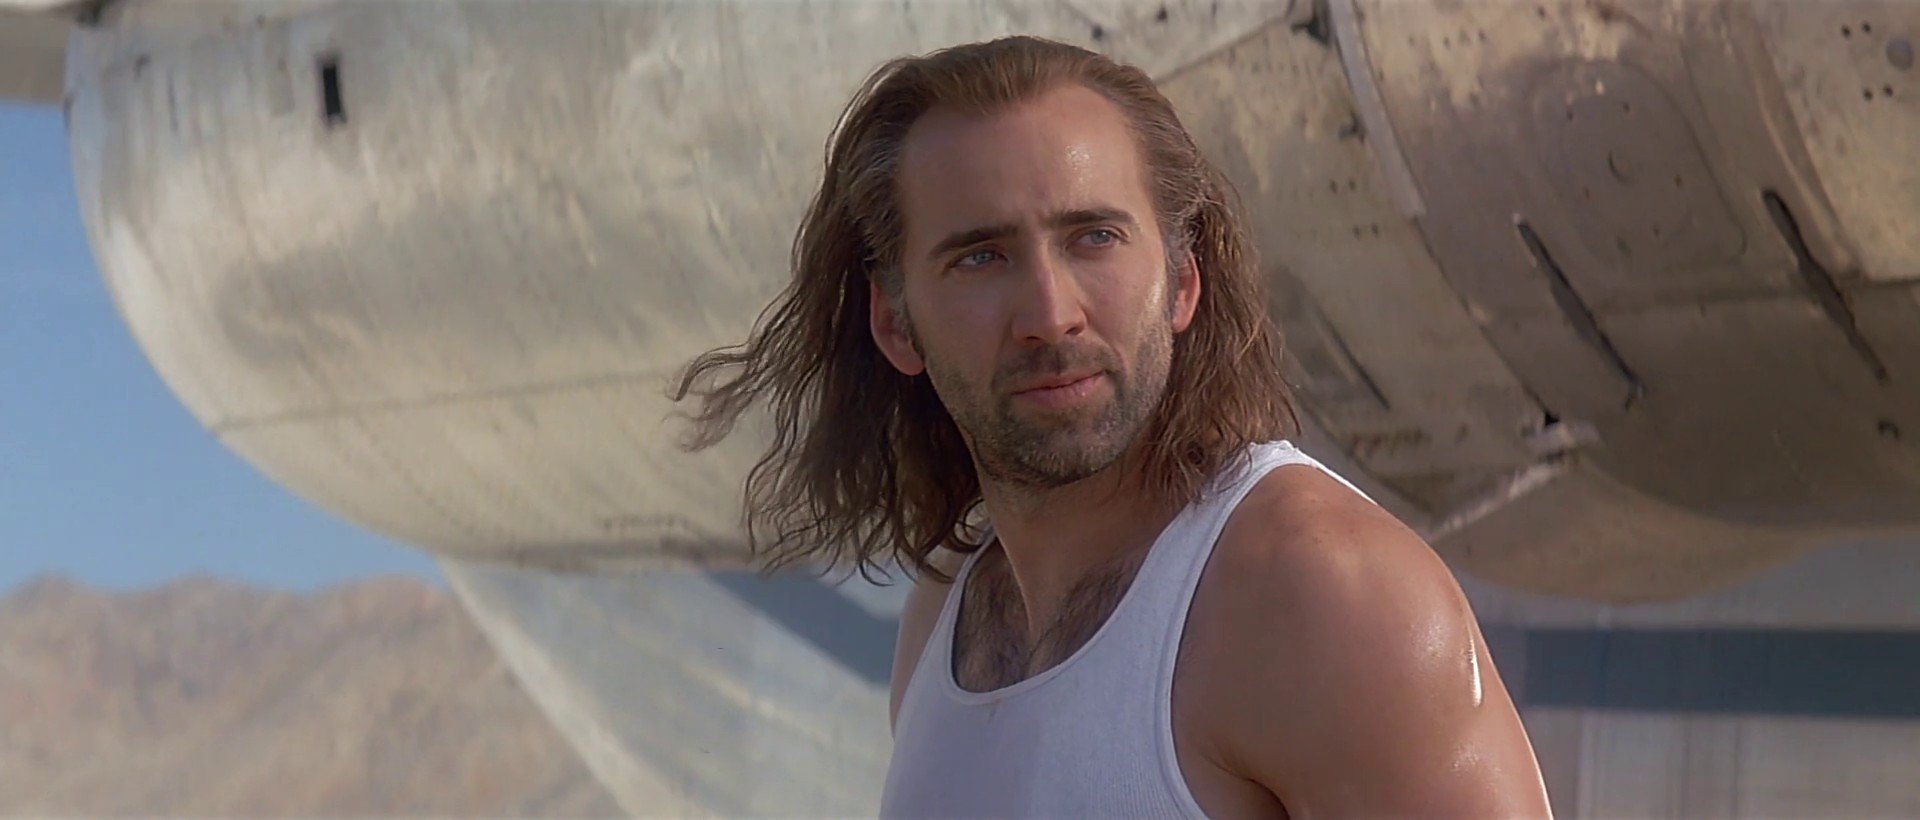 Muscles, mullets and Malkovich: has Con Air got even weirder with age?, Action and adventure films